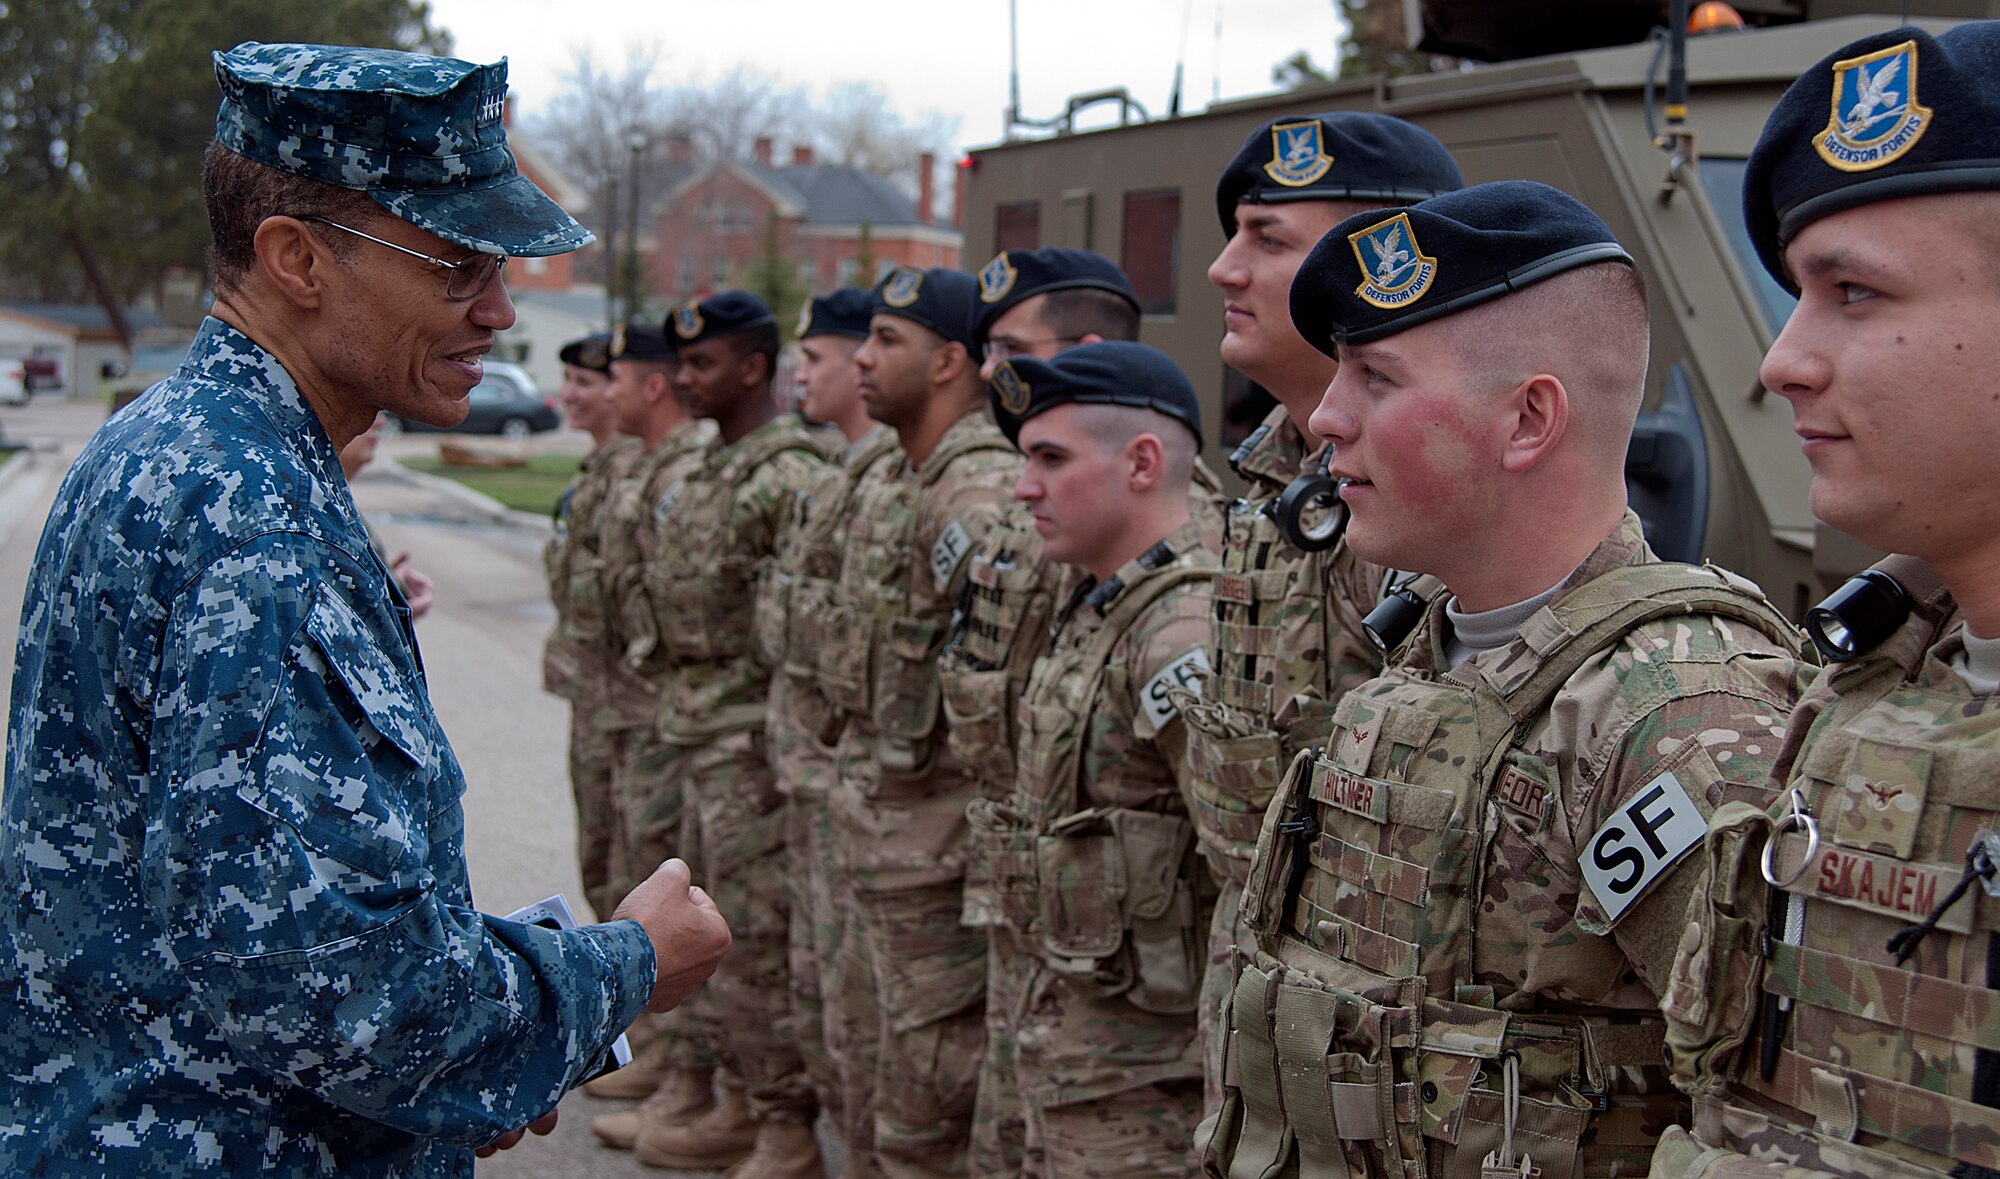 U.S. Navy Adm. Cecil D. Haney, U.S. Strategic Command commander, talks with 790th Missile Security Forces Squadron convoy response force members during a visit to F.E. Warren Air Force Base, Wyo., April 28, 2015. Haney traveled to F.E. Warren to see firsthand the men and women performing the ICBM mission 24/7, 365, and to chair the Intercontinental Ballistic Missile Stakeholders meeting, one of several such meetings that will be held this year. USSTRATCOM is one of nine DoD unified combatant commands and is charged with strategic deterrence; space operations; cyberspace operations; joint electronic warfare; global strike; missile defense; intelligence, surveillance and reconnaissance; combating weapons of mass destruction; and analysis and targeting. (U.S. Air Force photo by Airman 1st Class Brandon Valle)